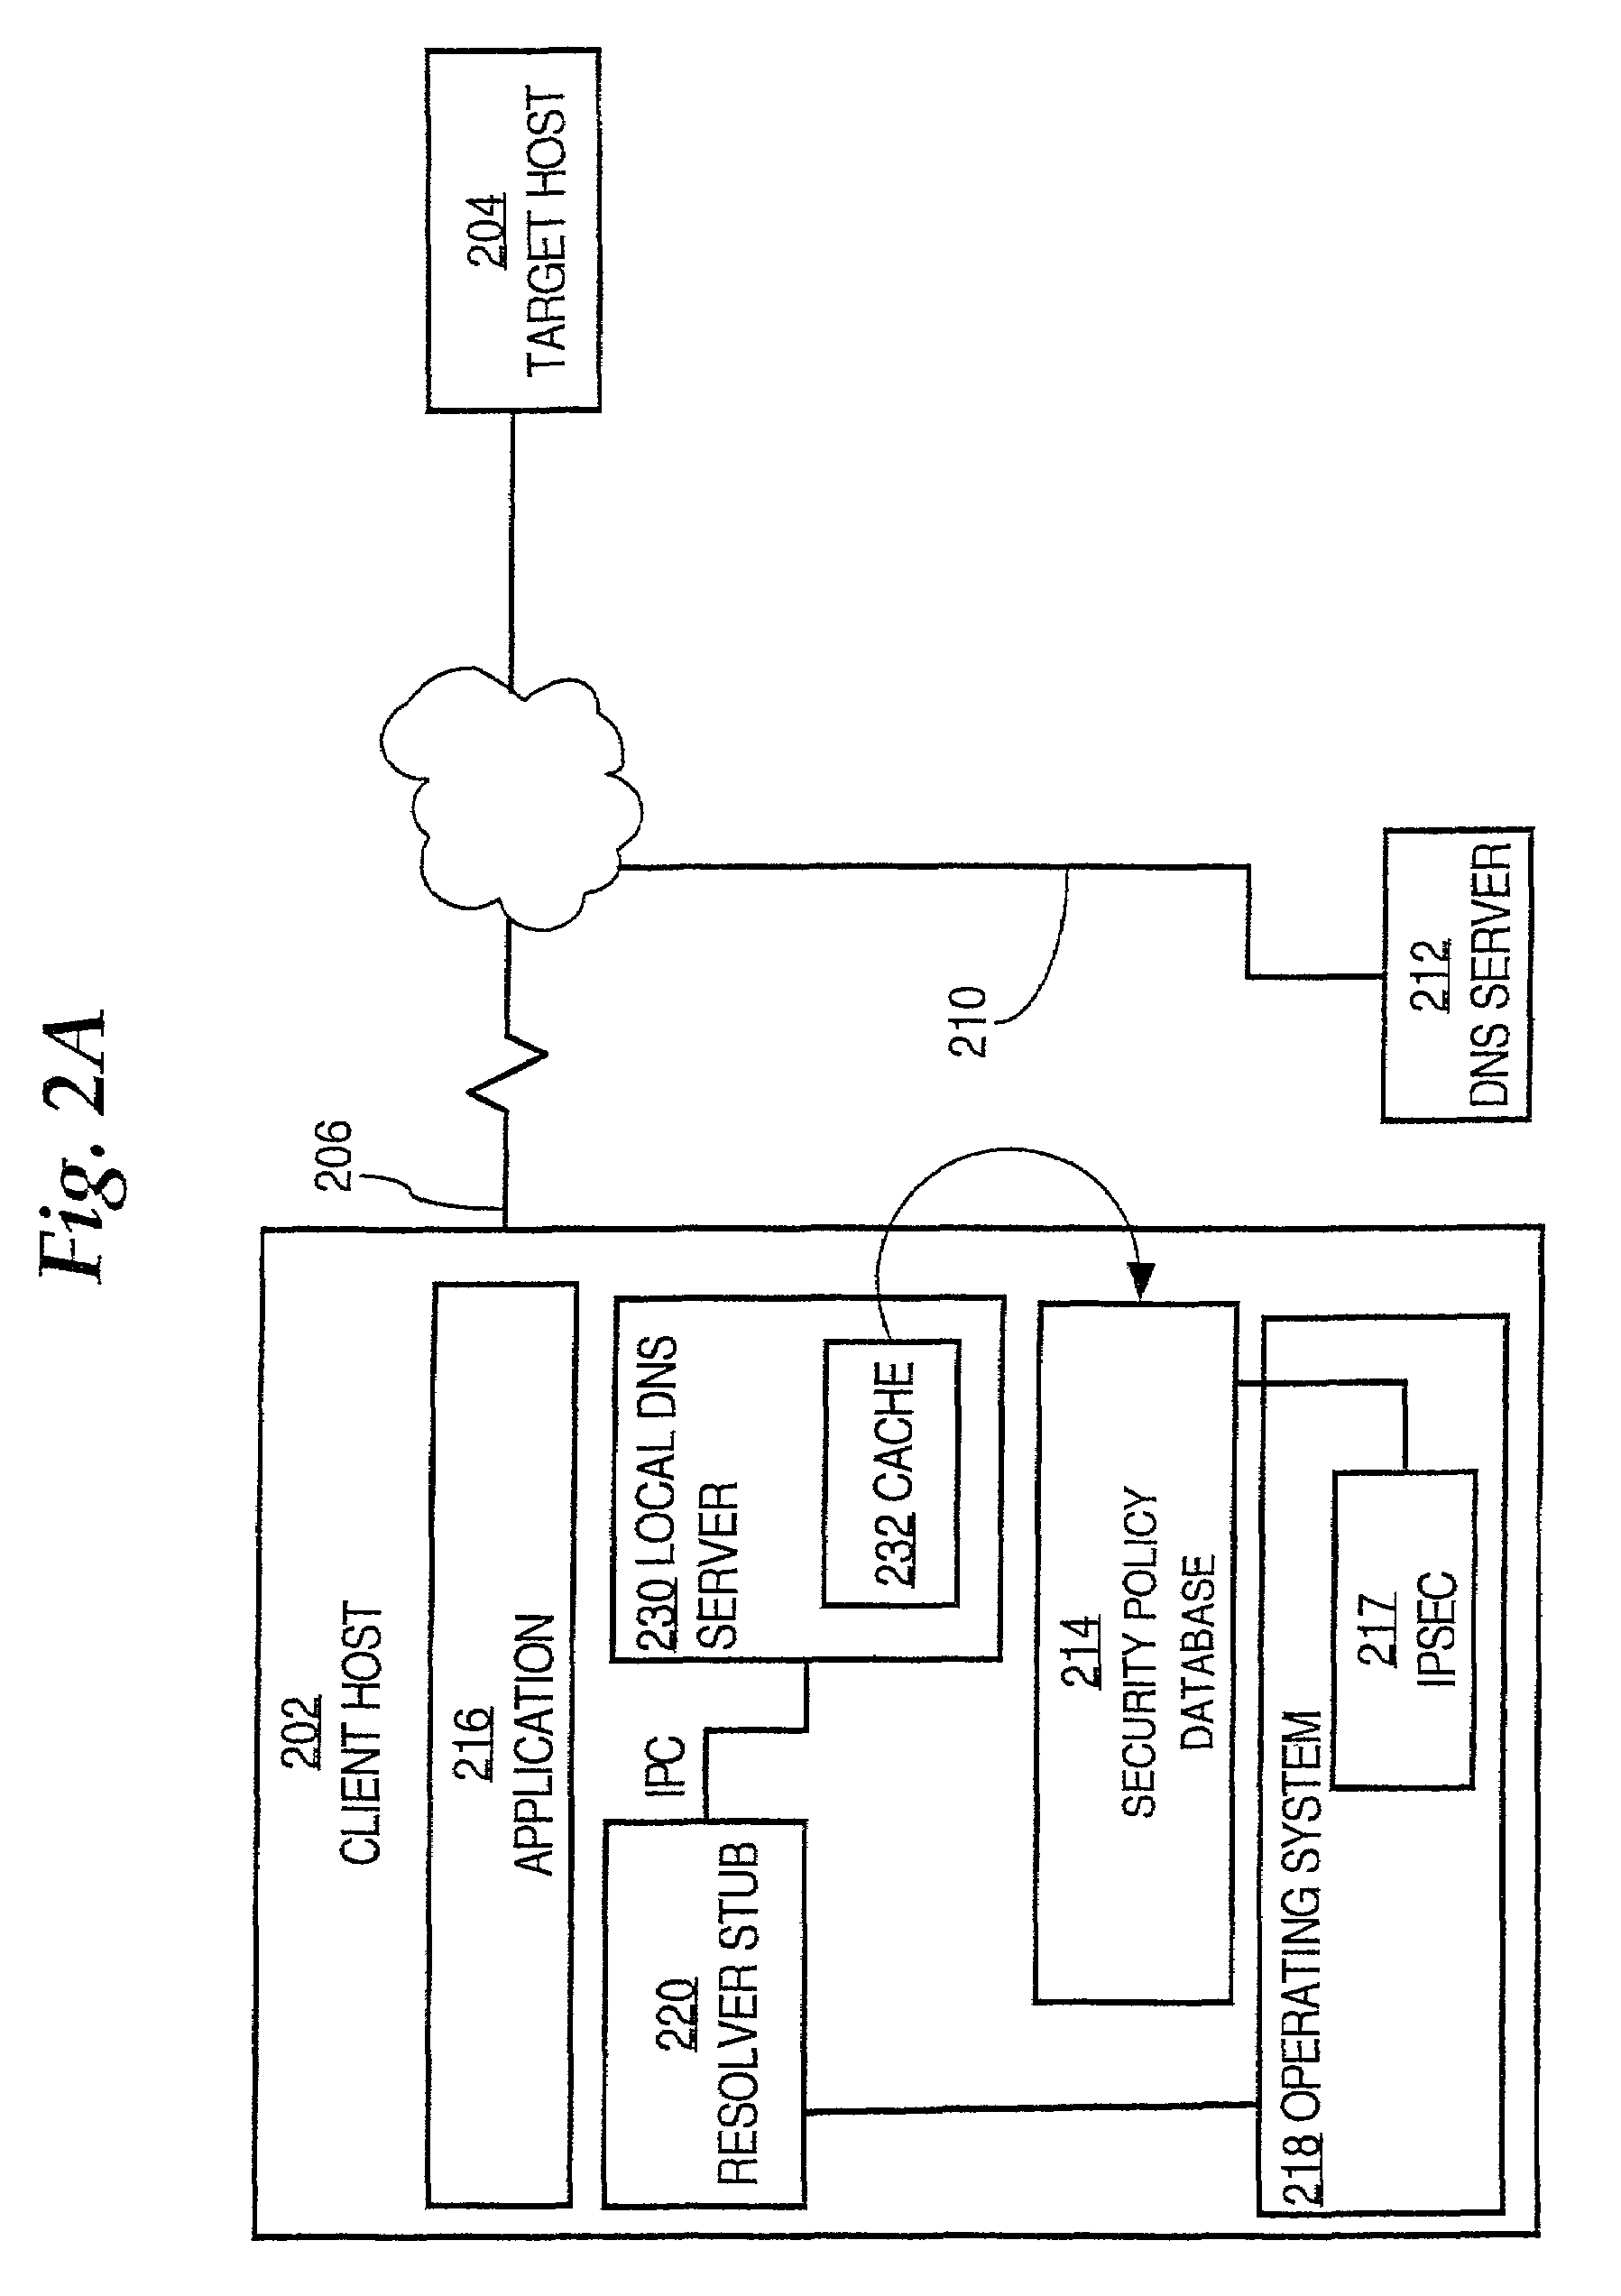 Process and system providing internet protocol security without secure domain resolution